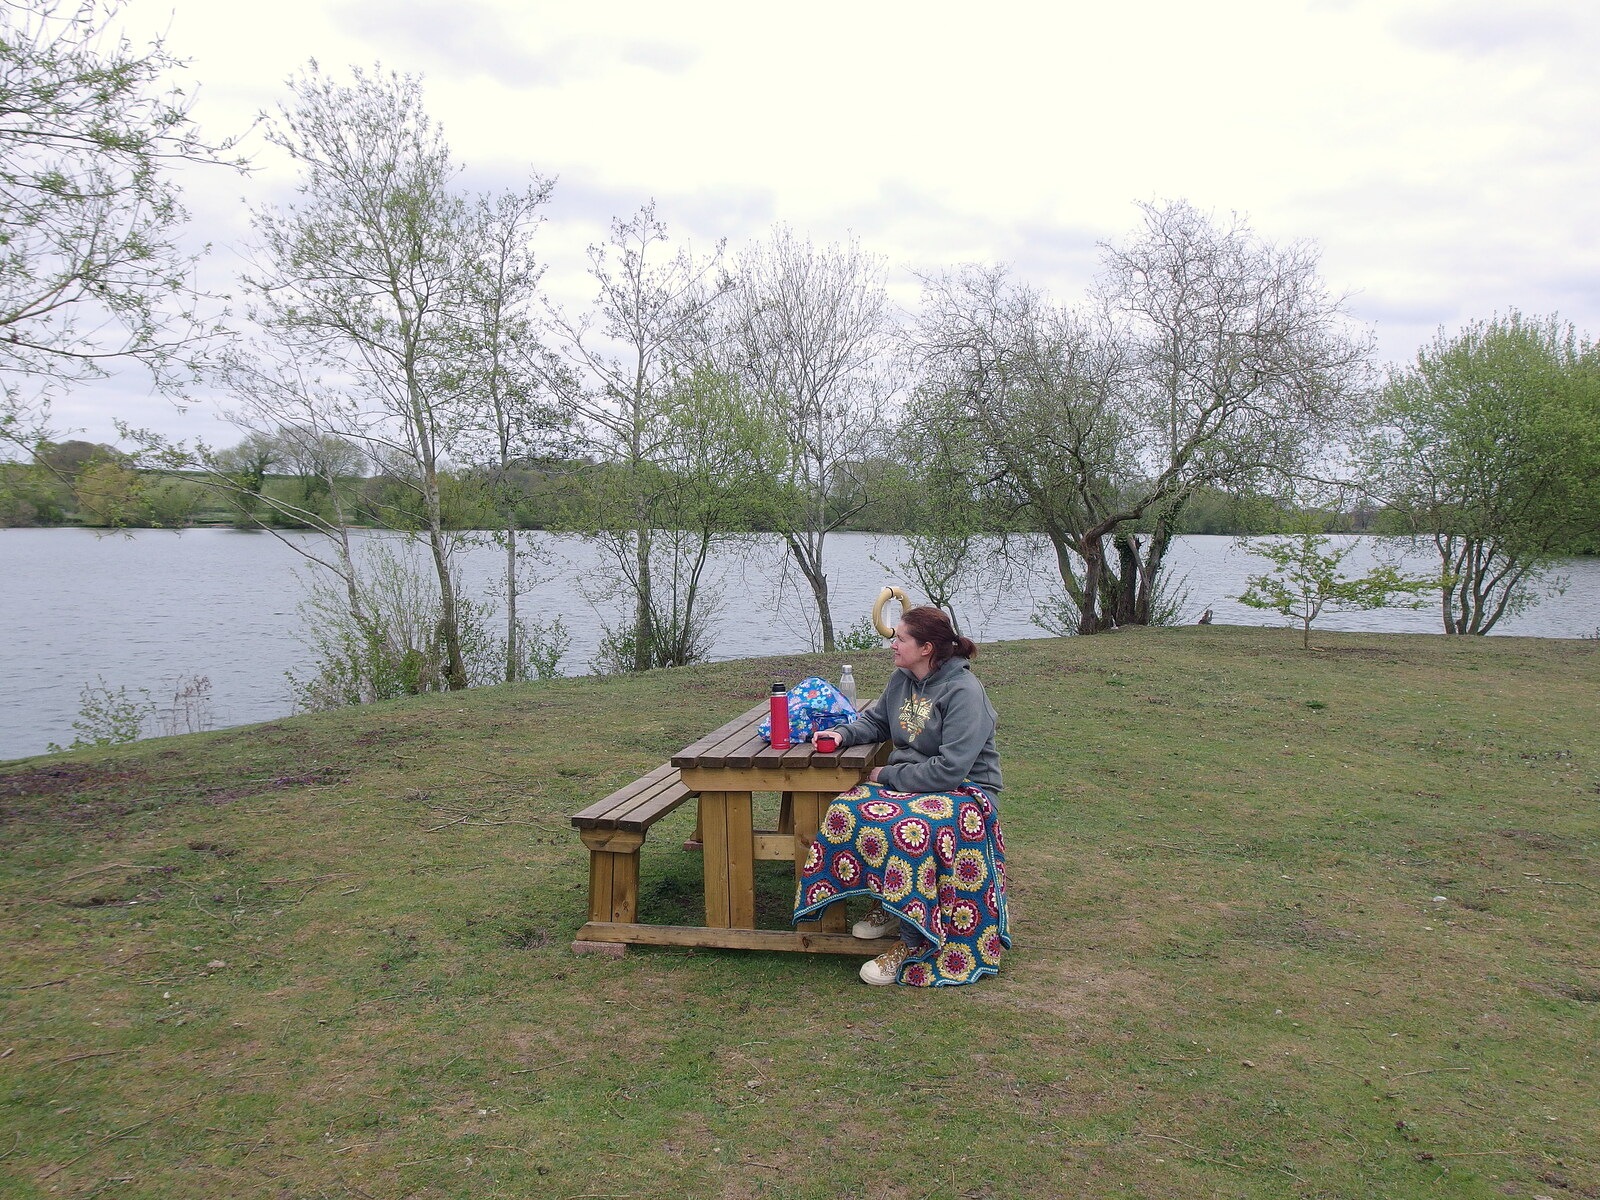 The Canoe's First Outing, Weybread Lake, Harleston - 1st May 2022: Isobel eats a cold and windy picnic